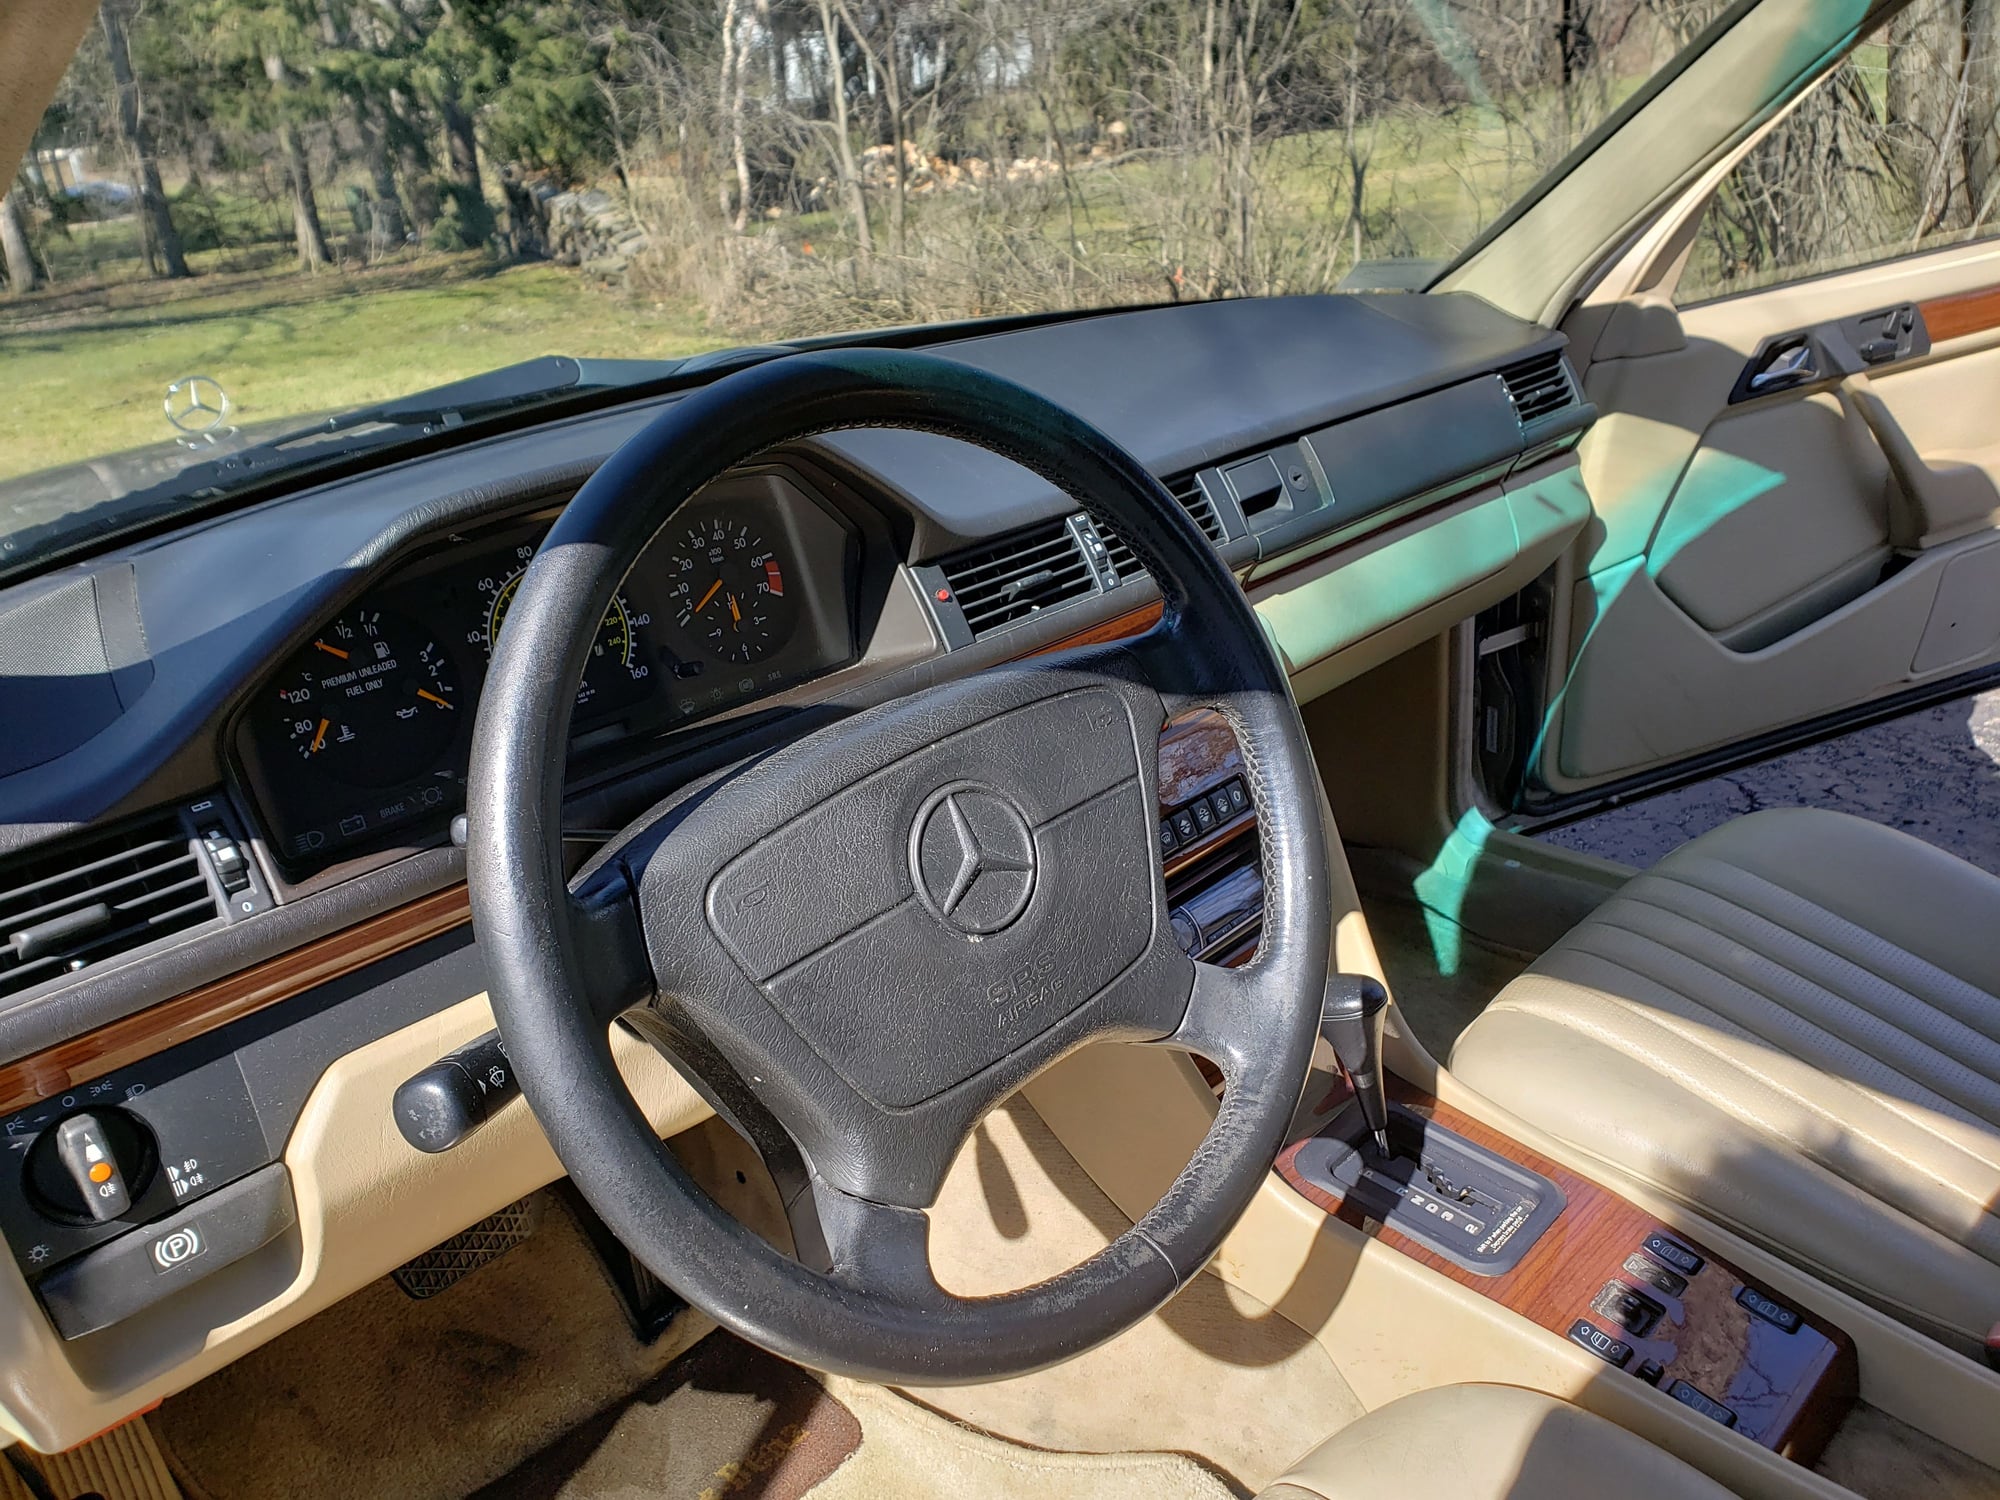 1992 Mercedes-Benz 300E - Low Miles on MB Classic - Used - VIN Wdbea26d1nb596044 - 137,000 Miles - 2 cyl - 2WD - Automatic - Sedan - Gold - Palatine, IL 60067, United States